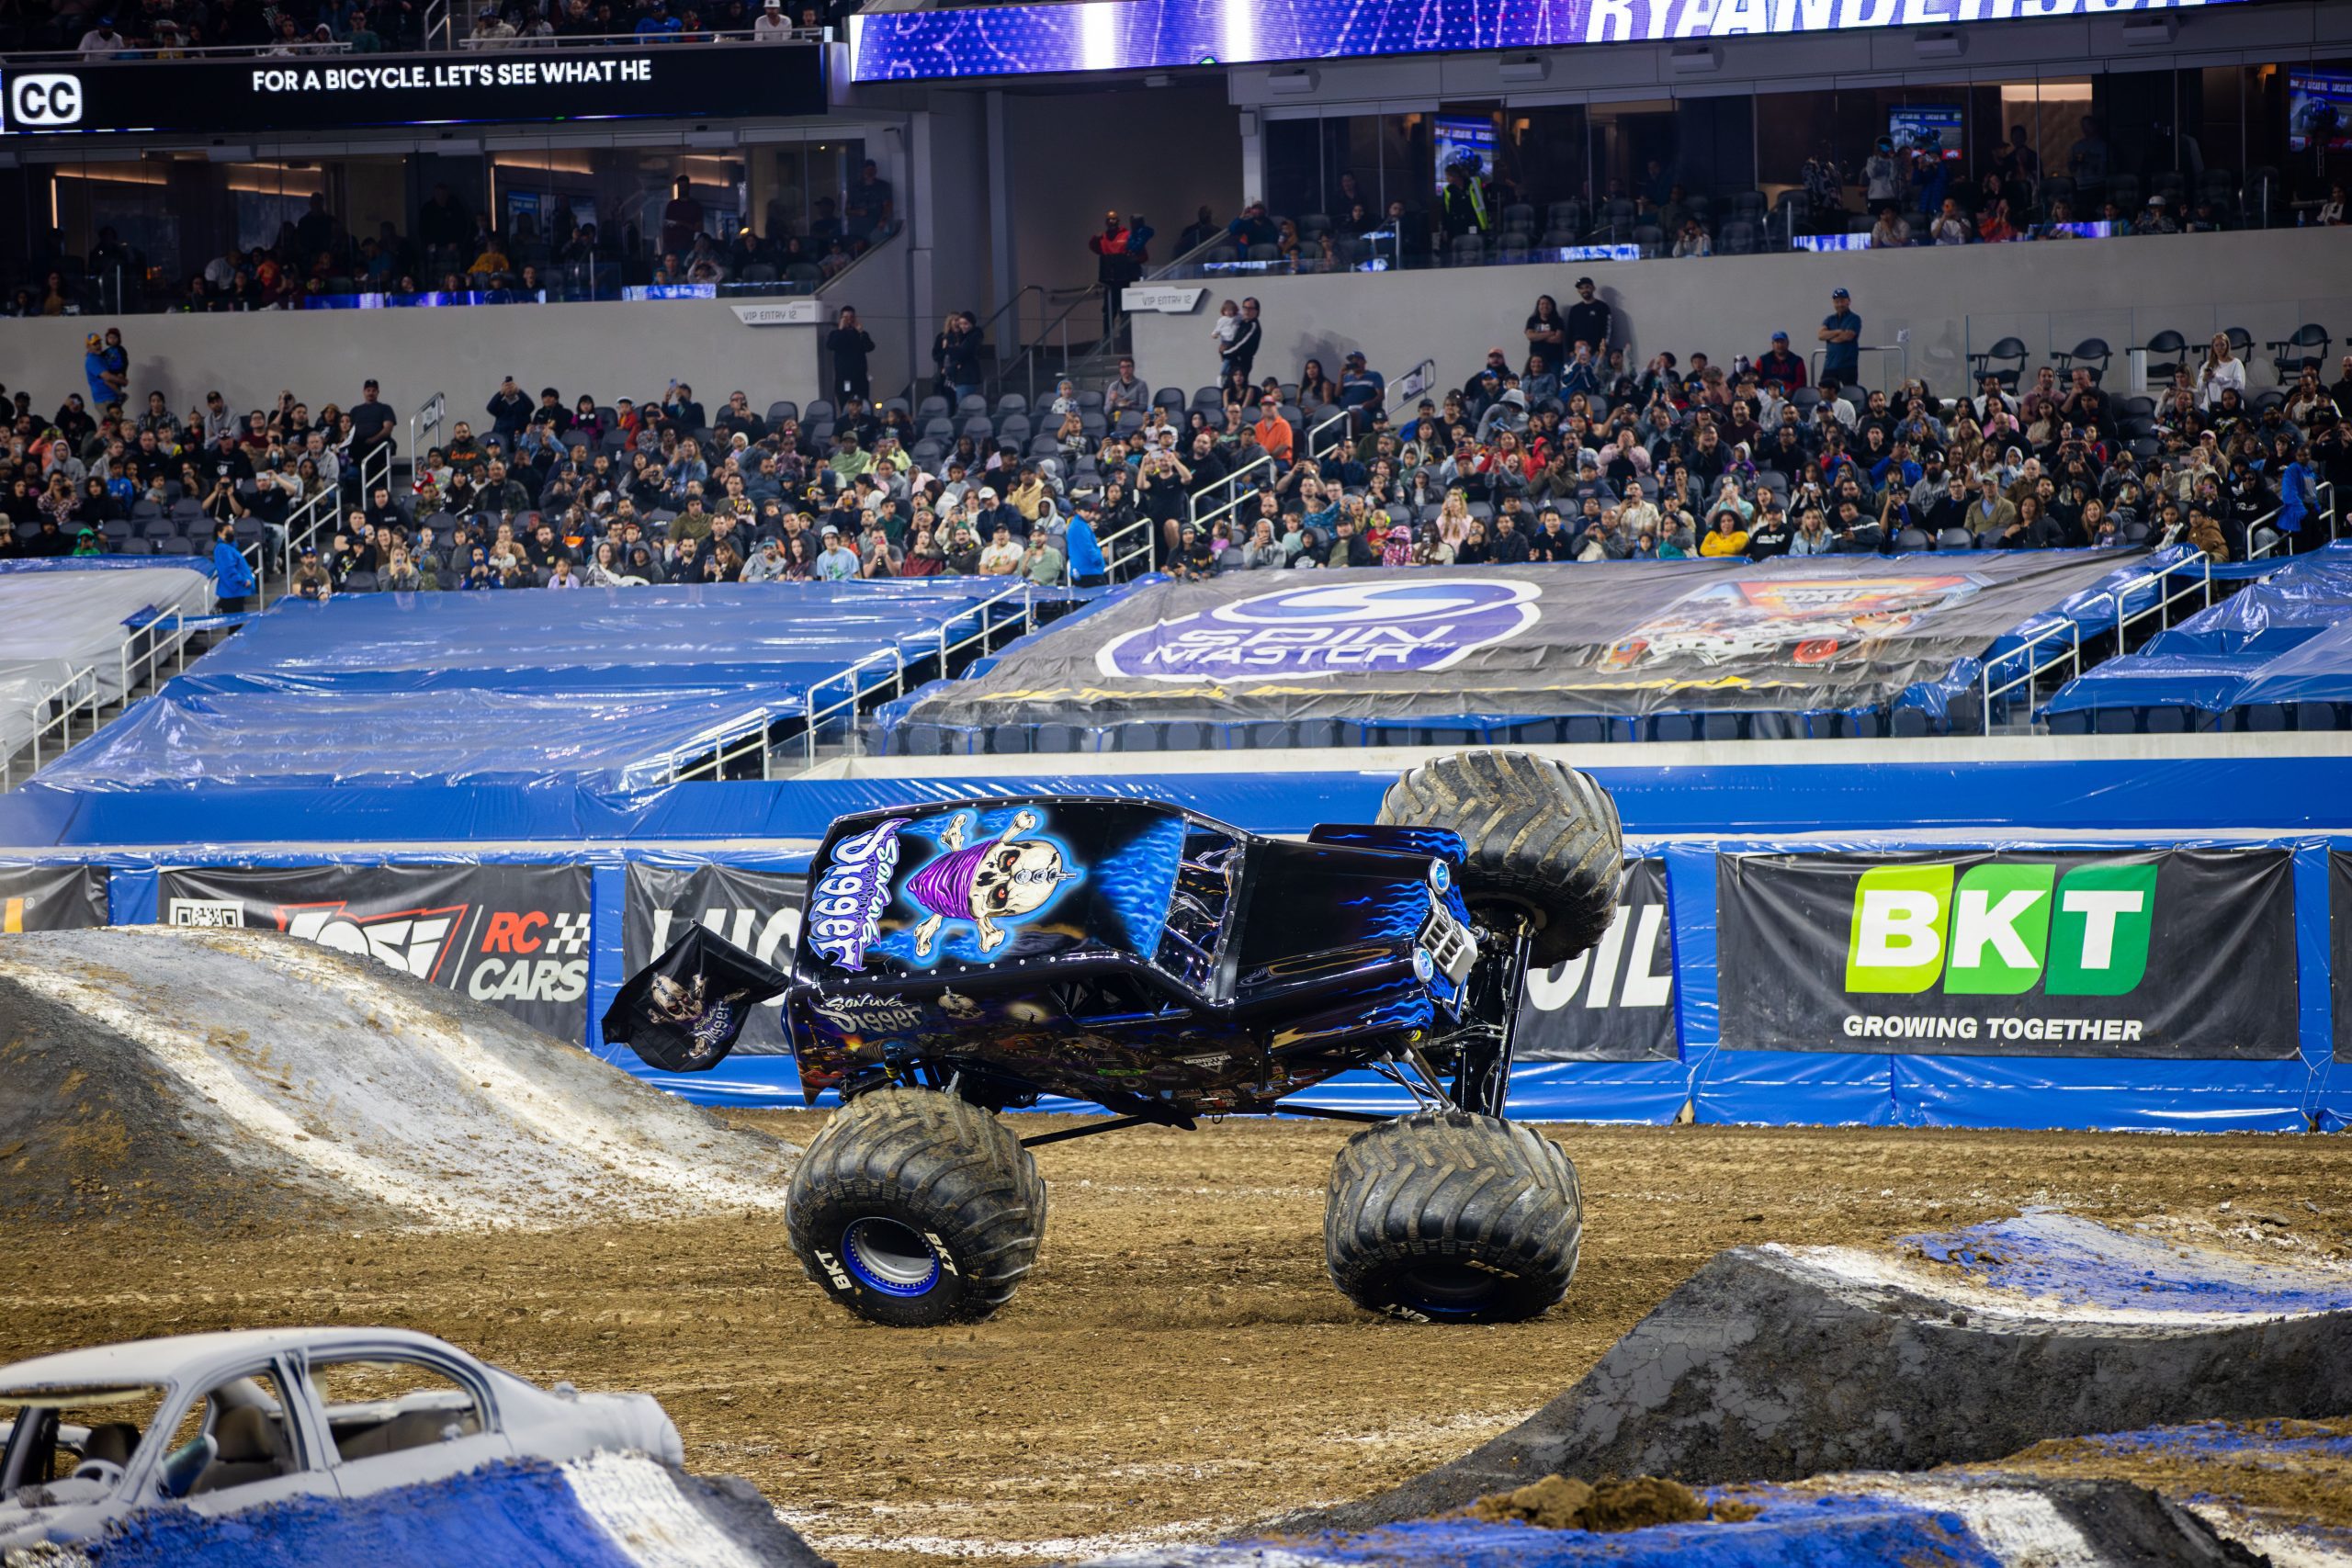 Anderson and Son-uva Digger score Monster Jam win at Protective Stadium